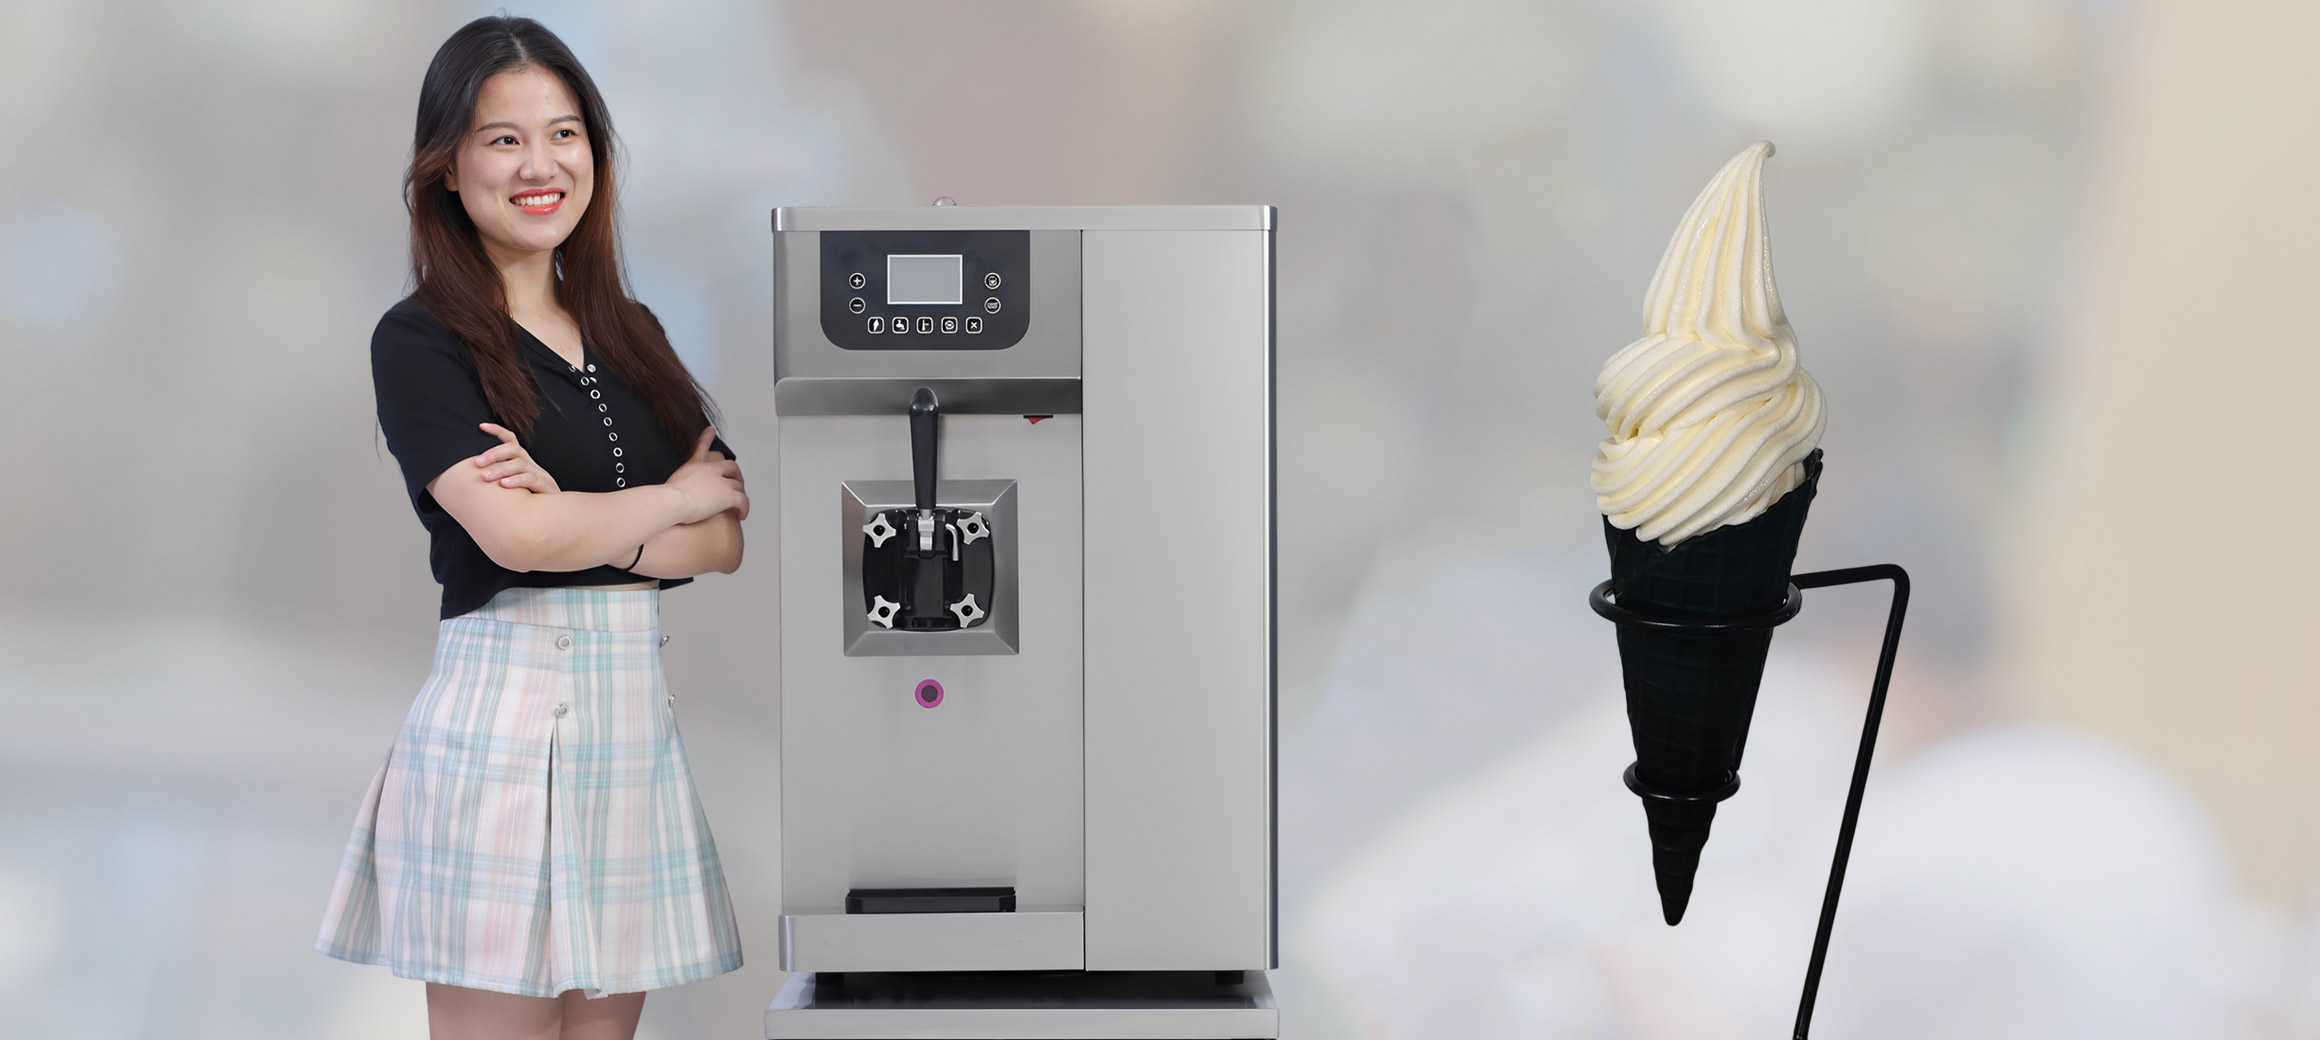 Commercial Ice Cream Machines - Commercial Gelato Machines and Classes